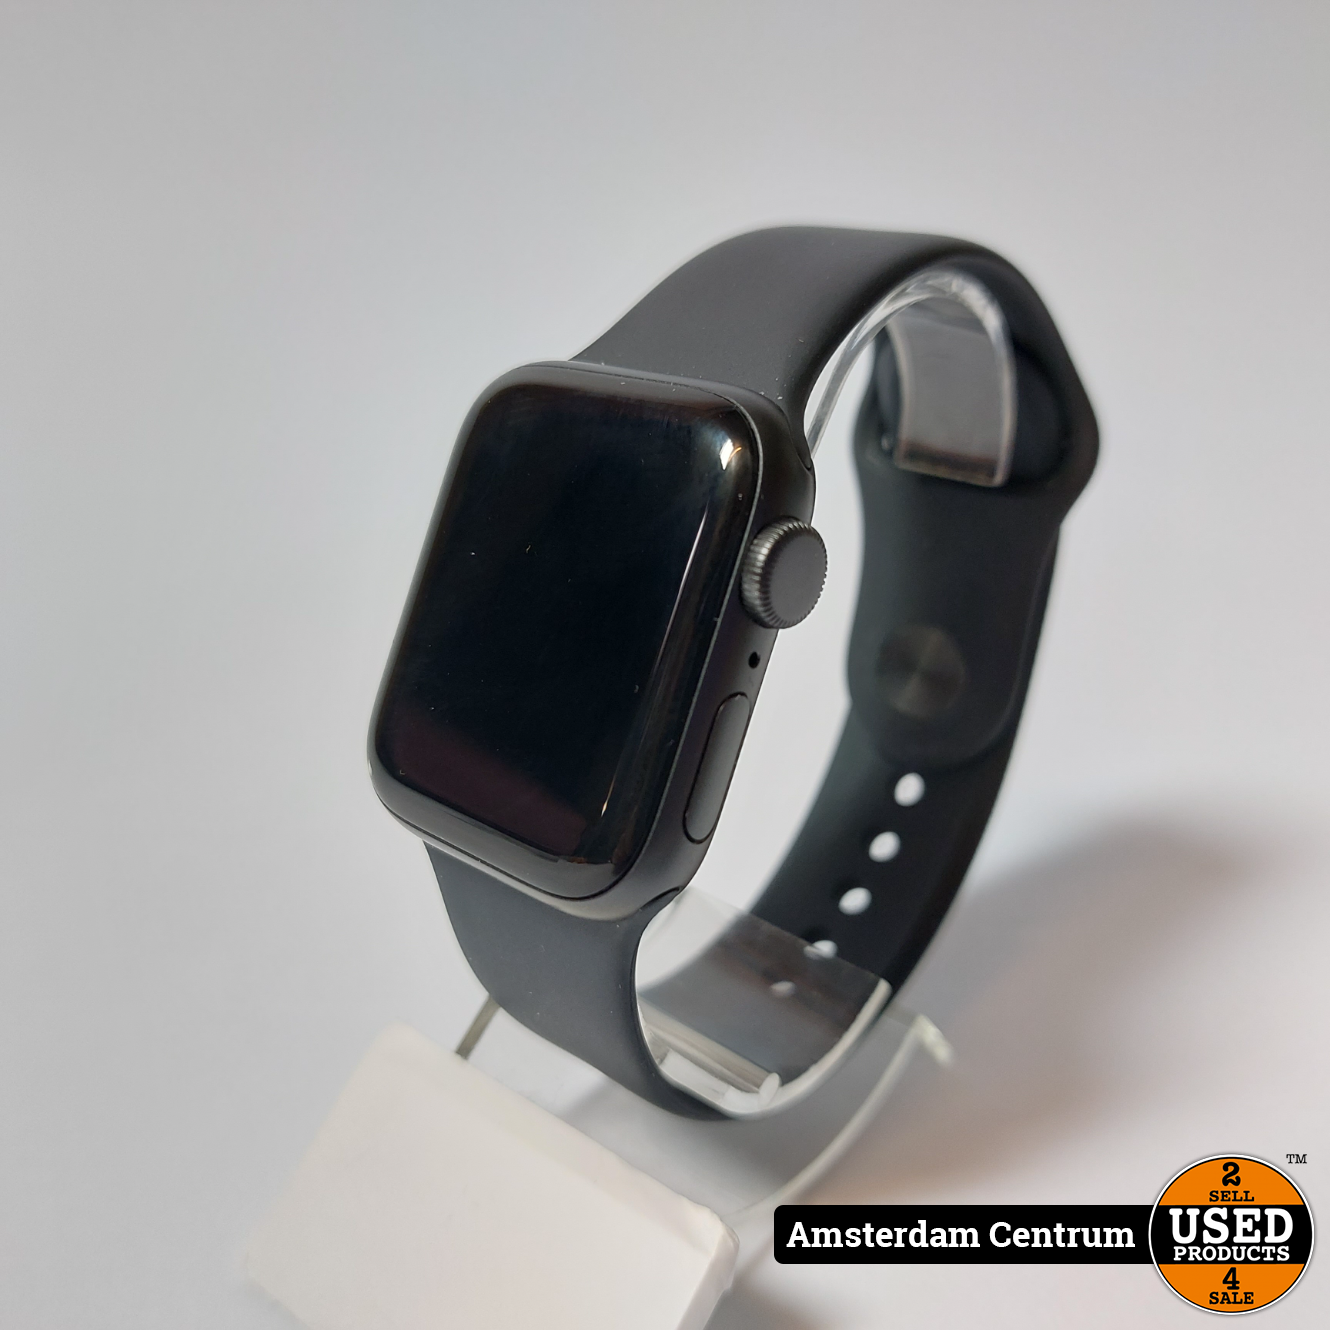 Bijlage stereo Wees Apple Watch SE 2021 40mm - Prima staat - Used Products Amsterdam Centrum